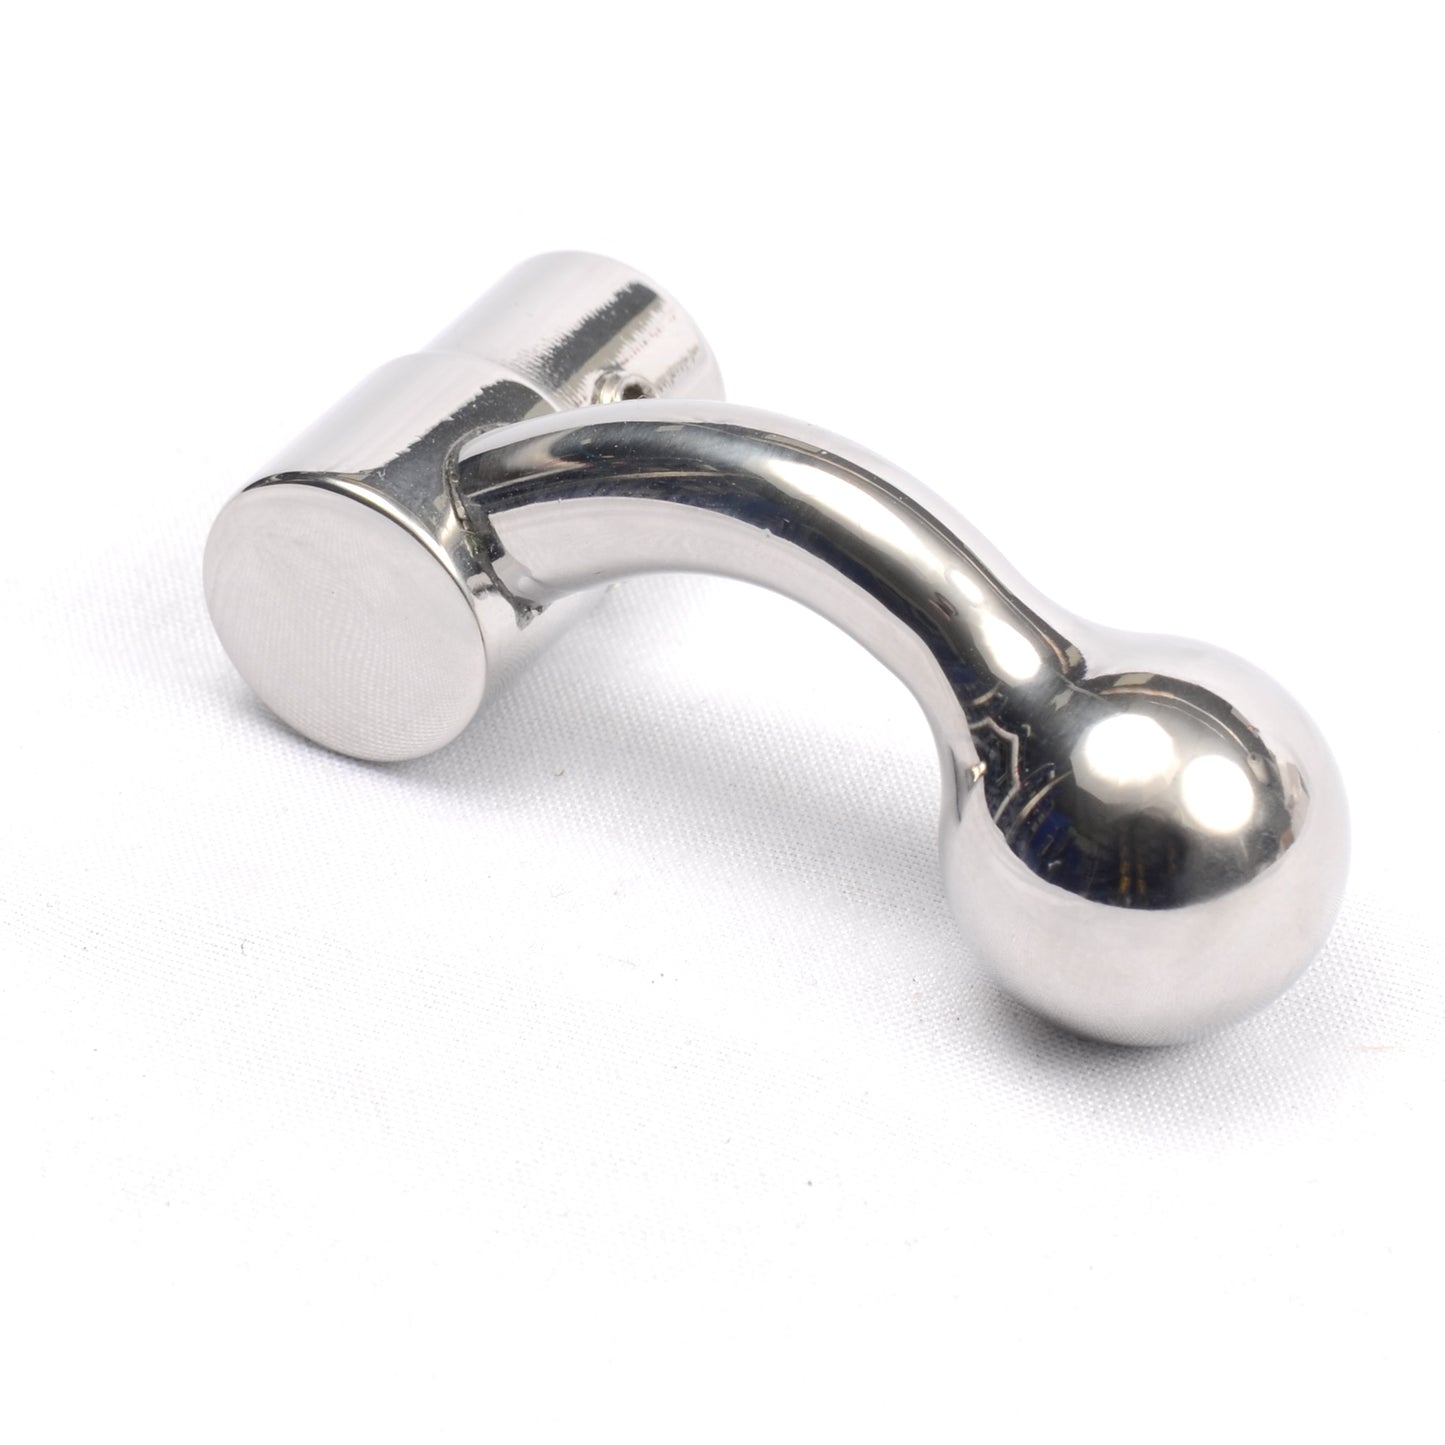 Daystate Bolt Handle. 6.3mm dia. mounting